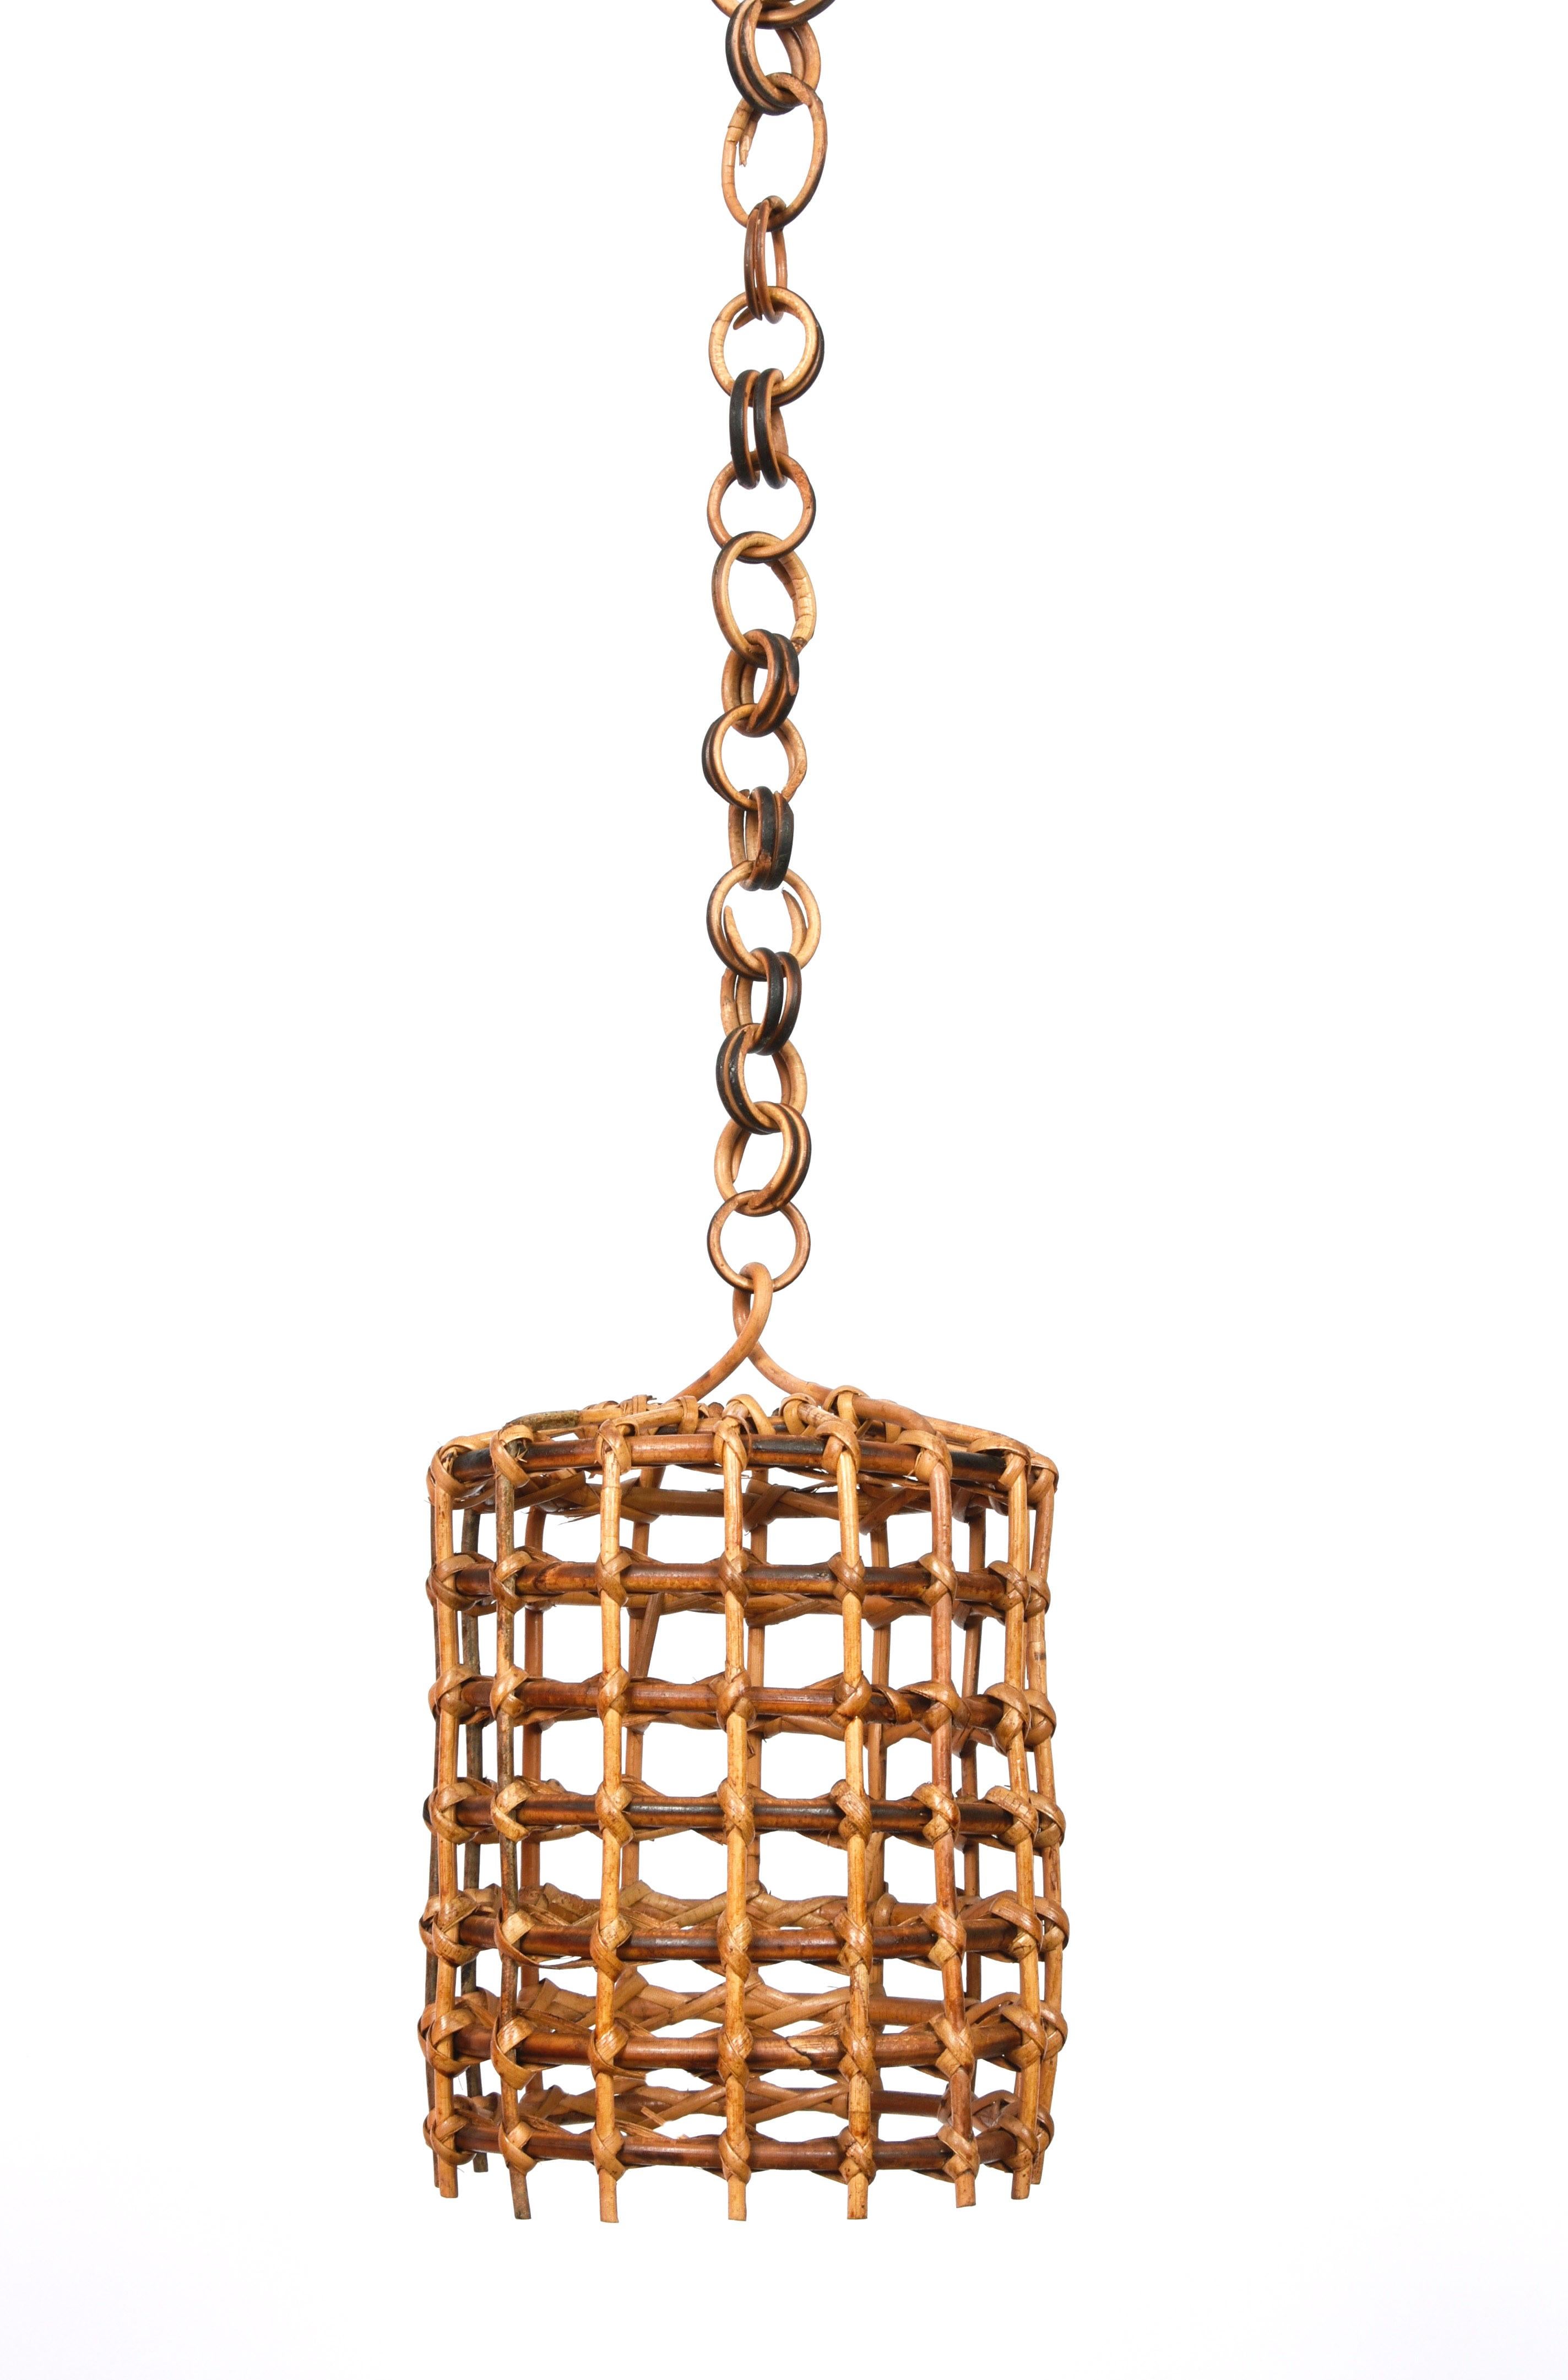 Wonderful midcentury bamboo, rattan and wicker pendant circular chandelier in French Riviera style, produced in Italy during the 1960s.

Its design is perfect for those who love the use of rattan to create wonderful masterpieces. It is made of a